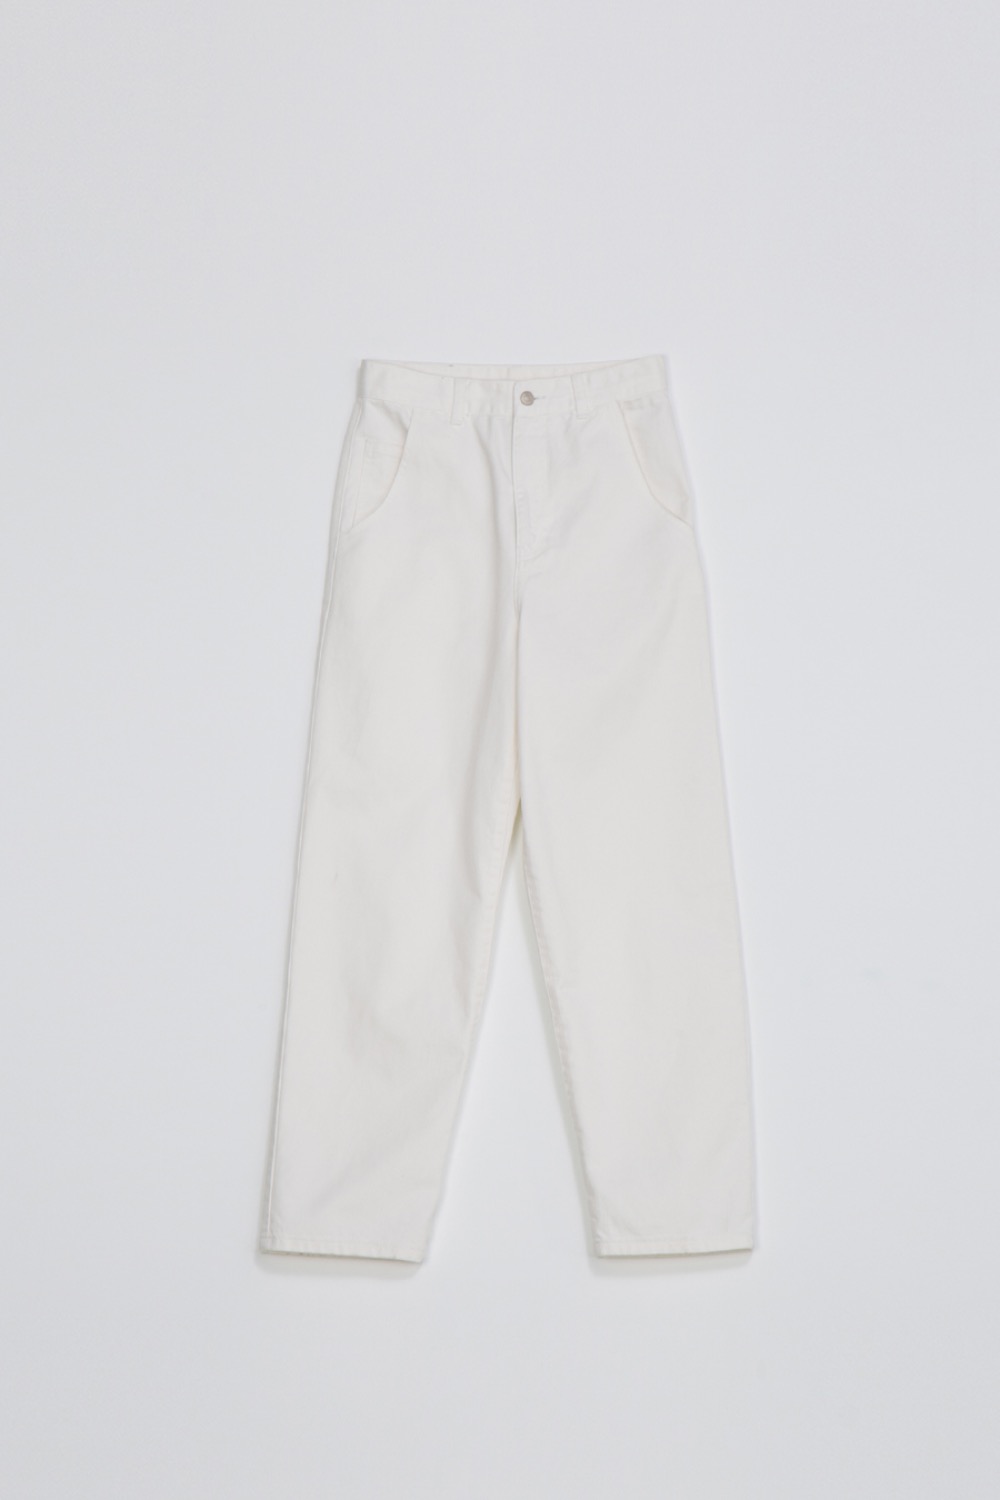 GARMENT DYED HIGHRISE JEAN - OPTIC WHITE COTTON